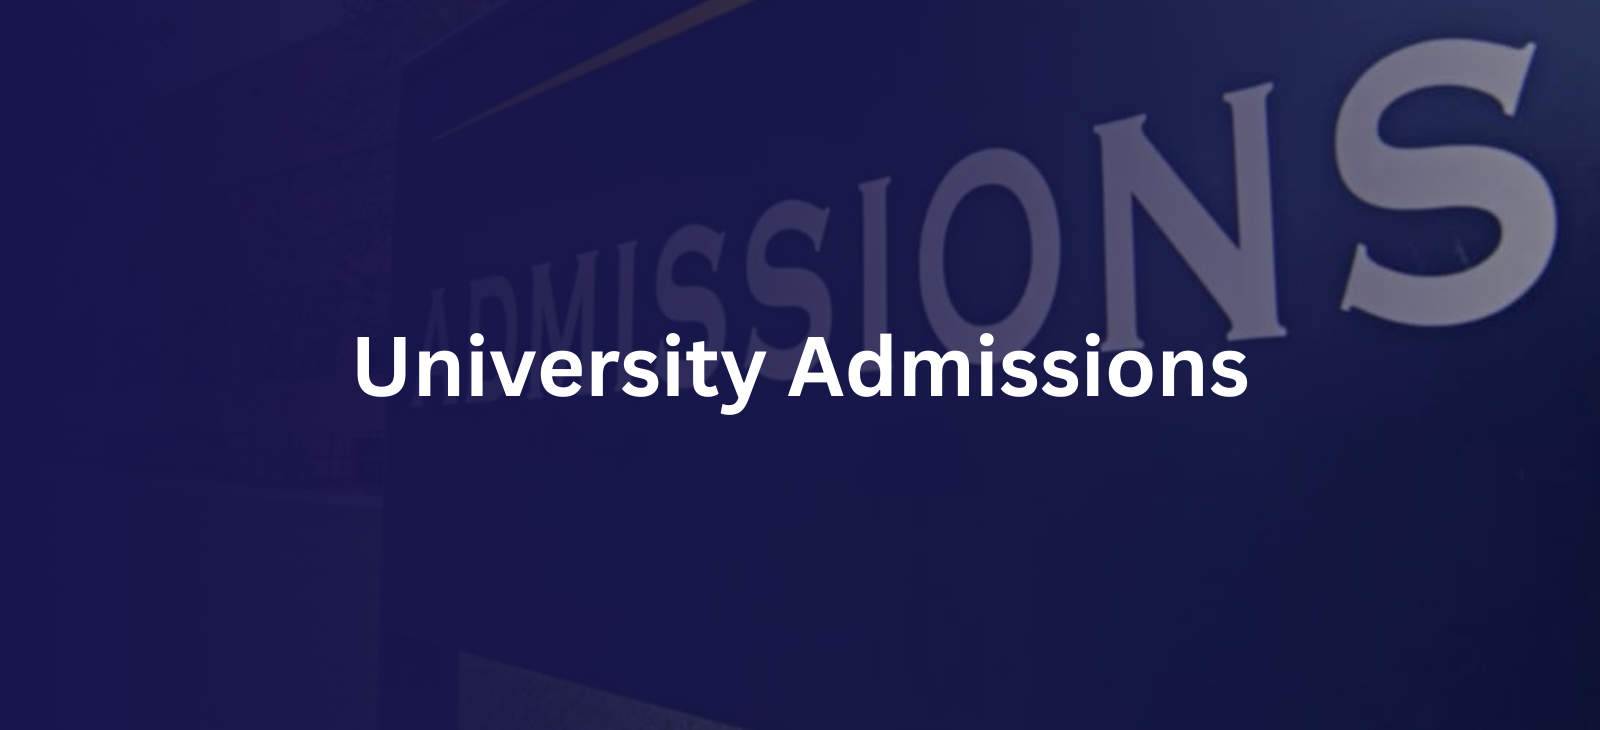 One Hub Study's University Admissions Services